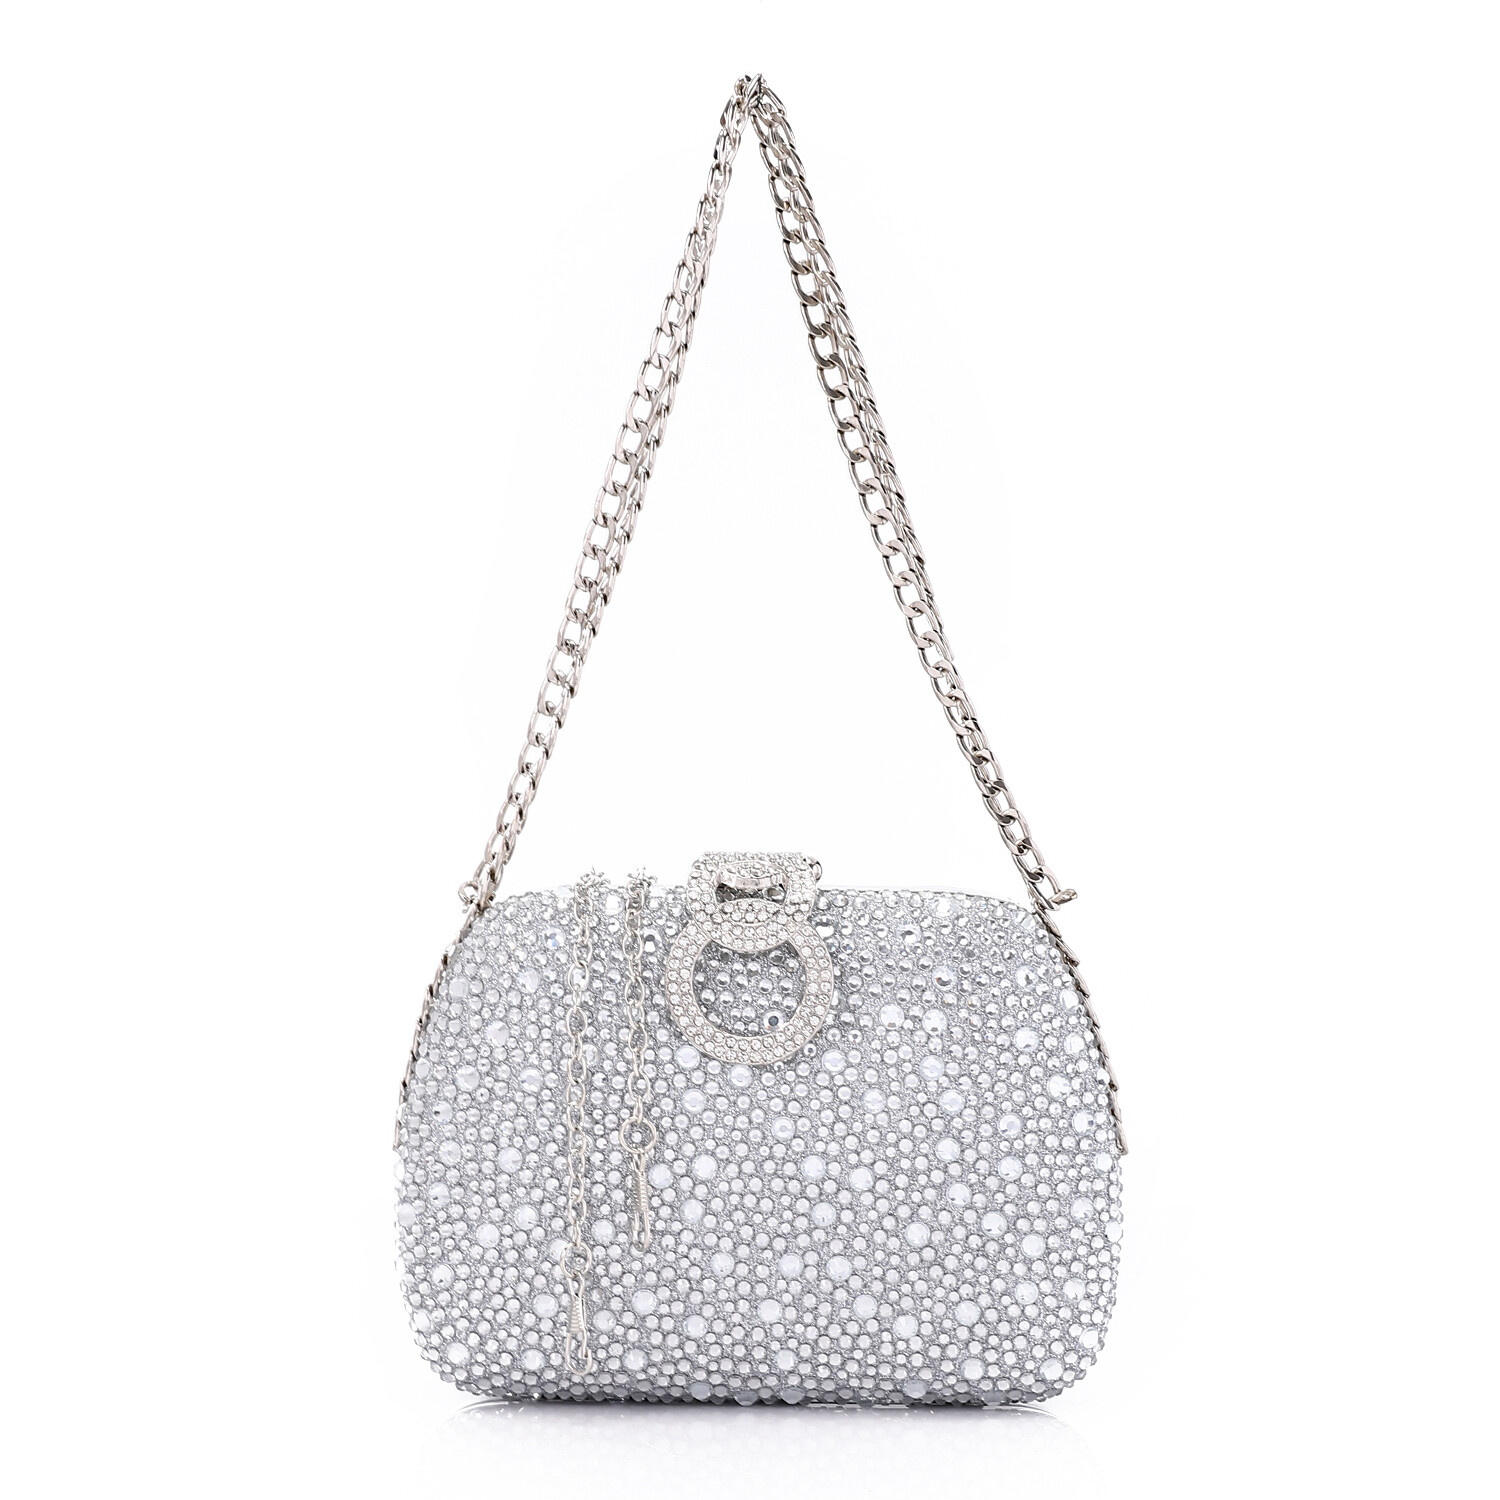 Prominent Diamond Synthetic Glittery Clutch - Silver 4990